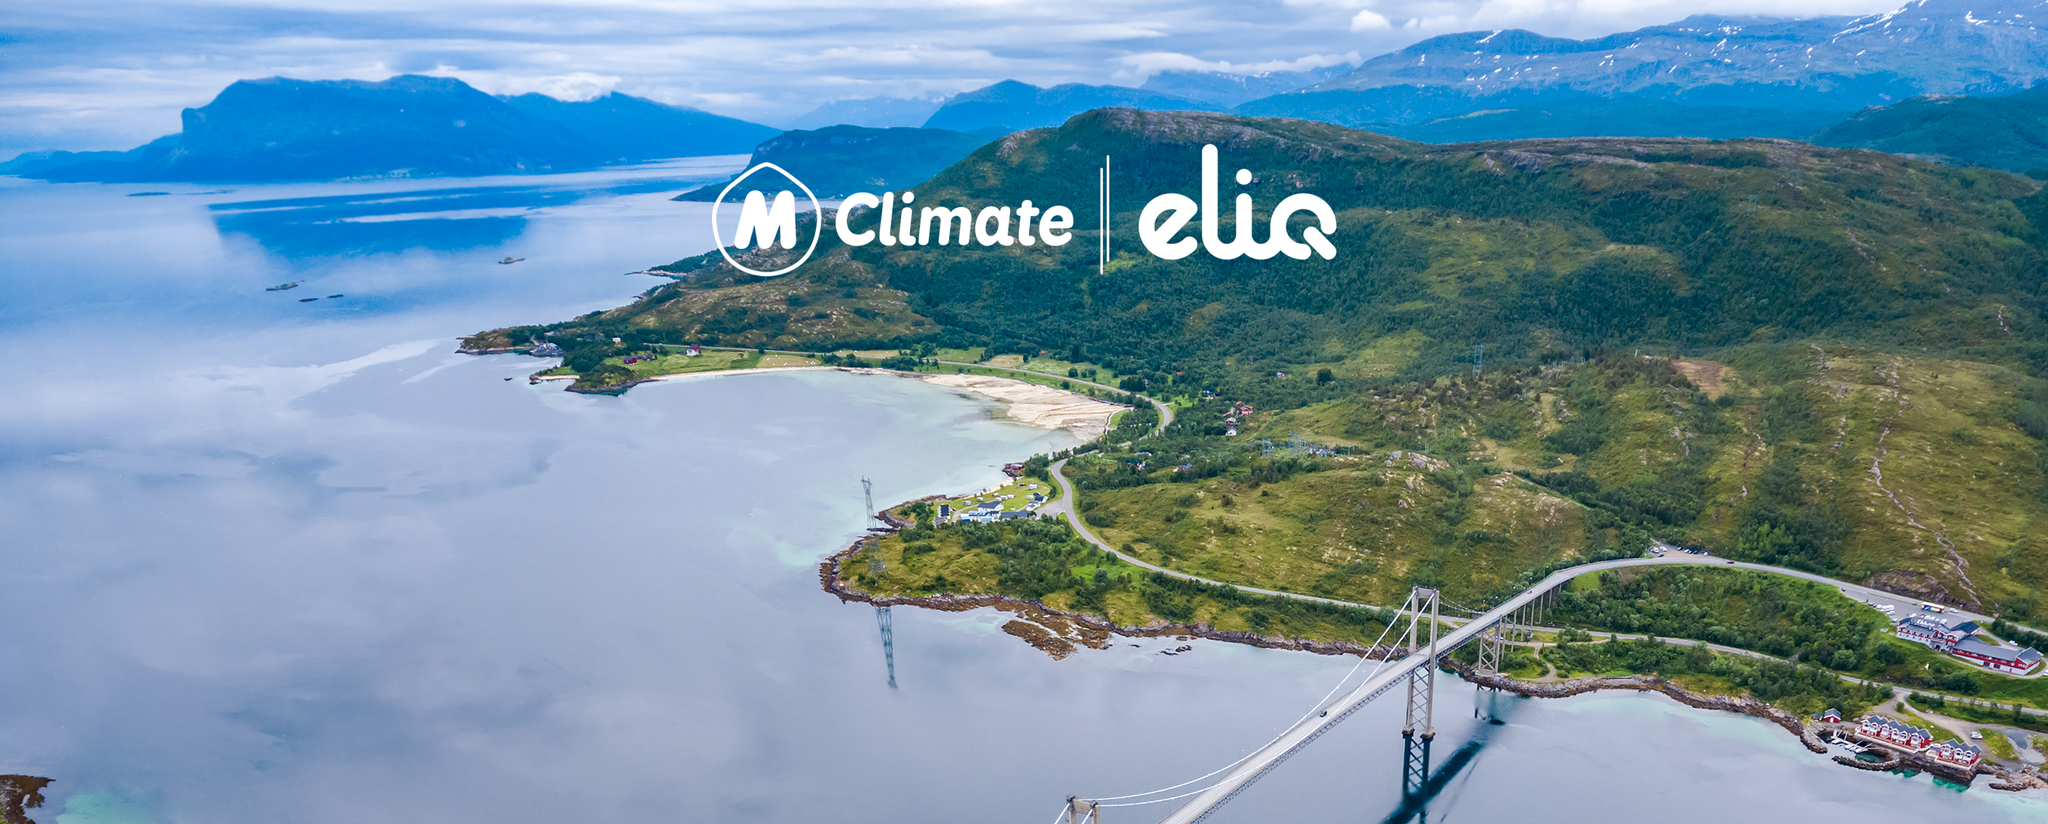 Eliq and MClimate join forces